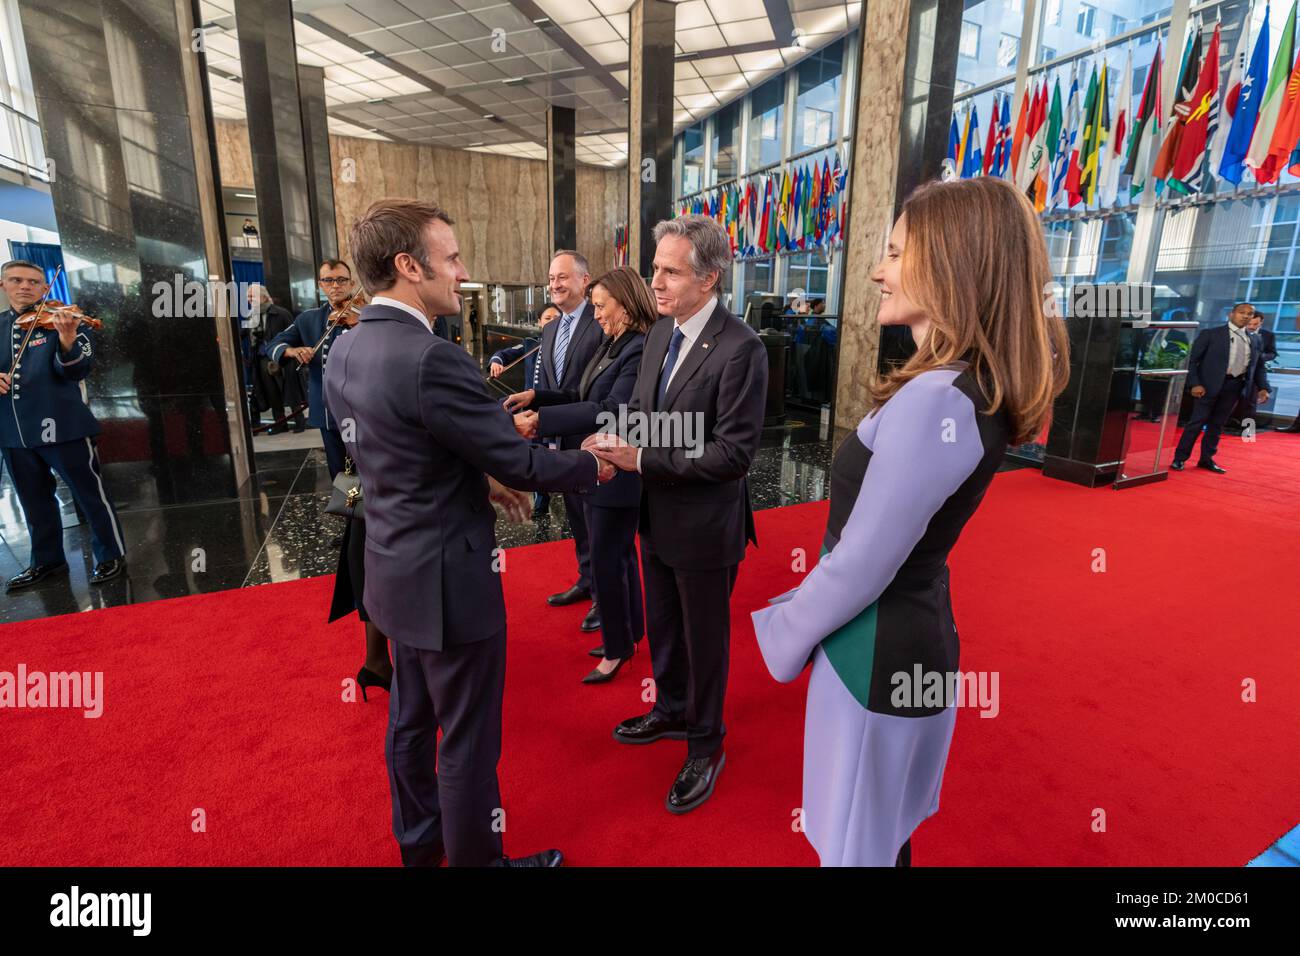 Evan Ryan, Secretary of State Antony J. Blinken, Vice President Kamala Harris, and Second Gentleman Doug Emhoff greet French President Emmanuel Macron and French First Lady Brigitte Macron before the State Luncheon in honor of the French President at the U.S. Department of State in Washington, D.C., on December 1, 2022. [State Department Photo by Ron Przysucha] Stock Photo